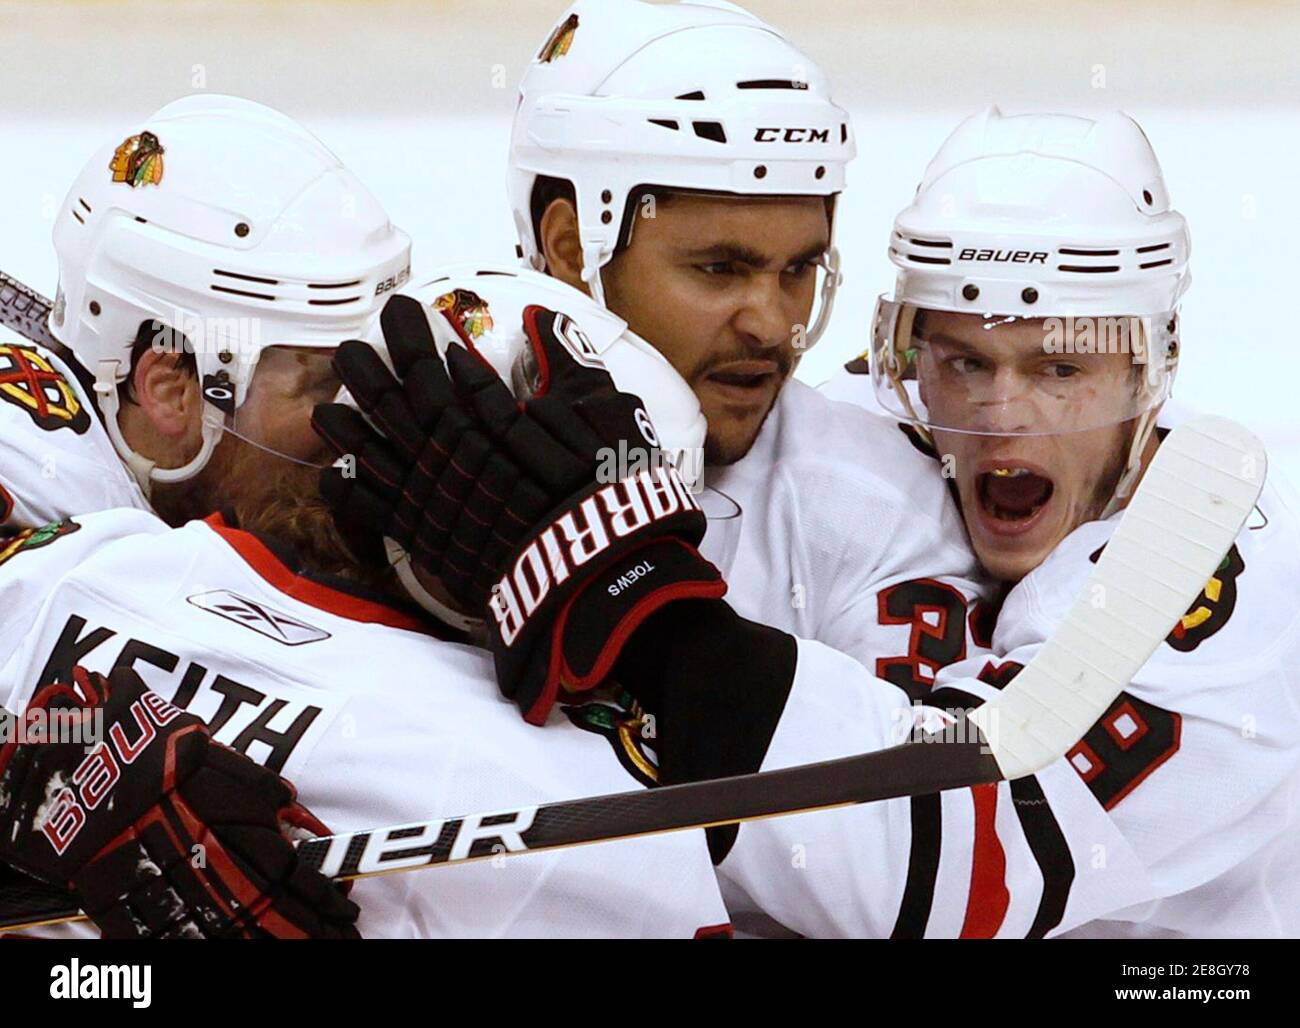 Chicago Blackhawks right wing Dustin Byfuglien (C) is congratulated by teammates Jonathan Toews (R) ,Duncan Keith (L2) and Patrick Sharp (L) after scoring against the Vancouver Canucks in the first period during Game 3 of their NHL Western Conference semi-final hockey game in Vancouver, British Columbia May 5, 2010.     REUTERS/Andy Clark       (CANADA - Tags: SPORT ICE HOCKEY) Stock Photo